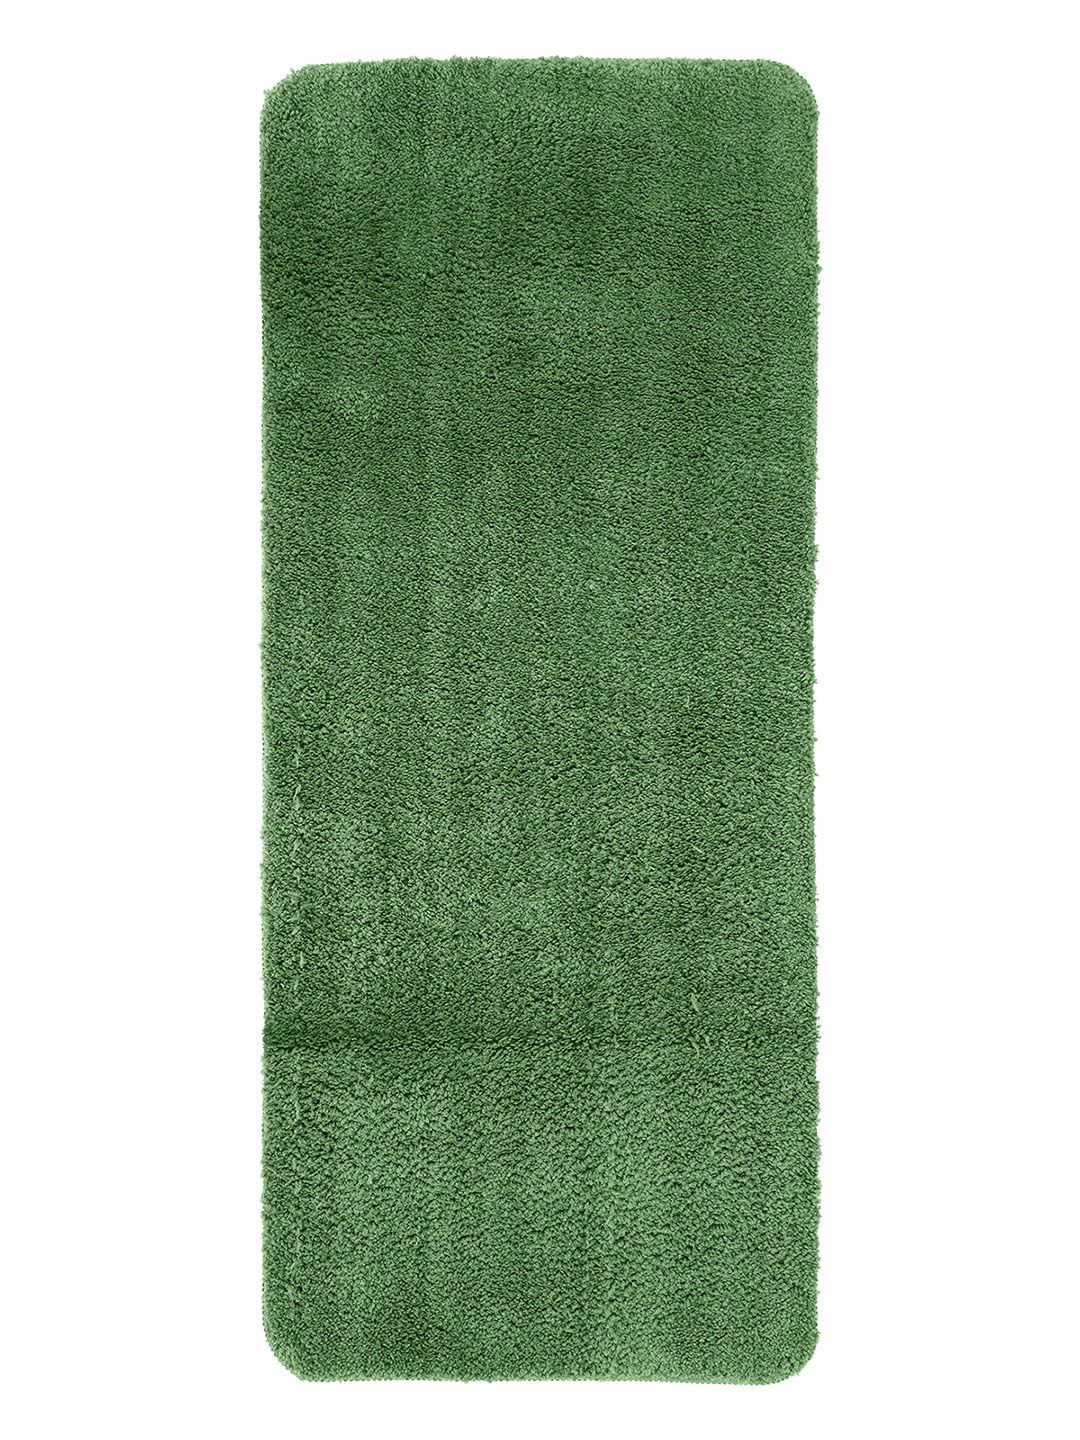 OBSESSIONS Green Textured Diana Anti-Skid Bath Rug Price in India